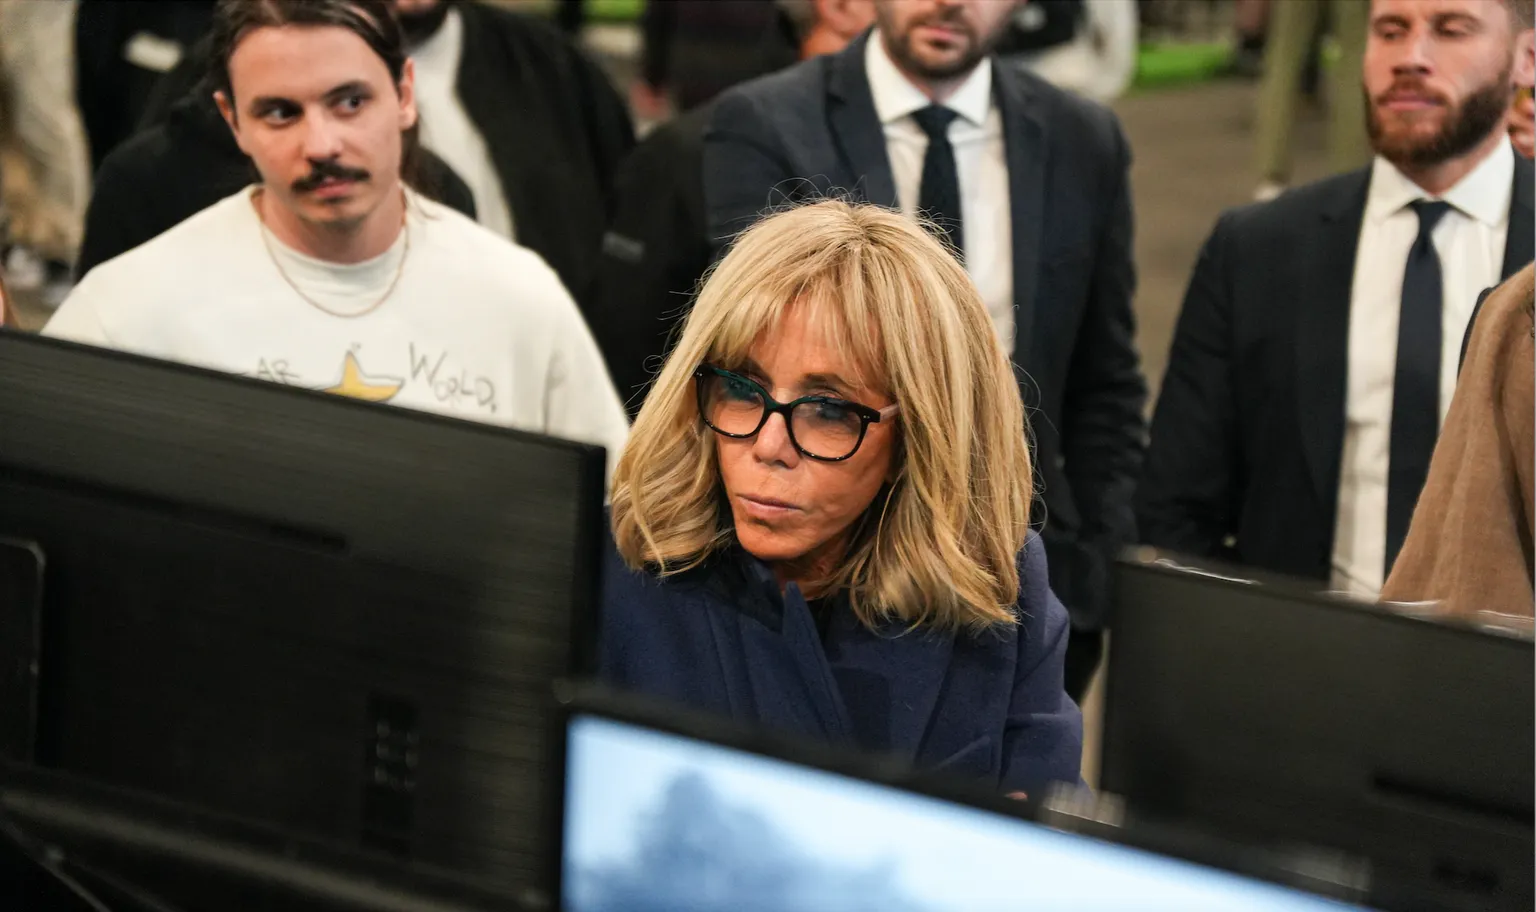 Brigitte Macron checks out a booth at NFT Paris on February 24, 2023 as NFT Paris Co-founder Alexandre Tsydenkov looks on. (Image: LA FRENCH IMAGERIE)